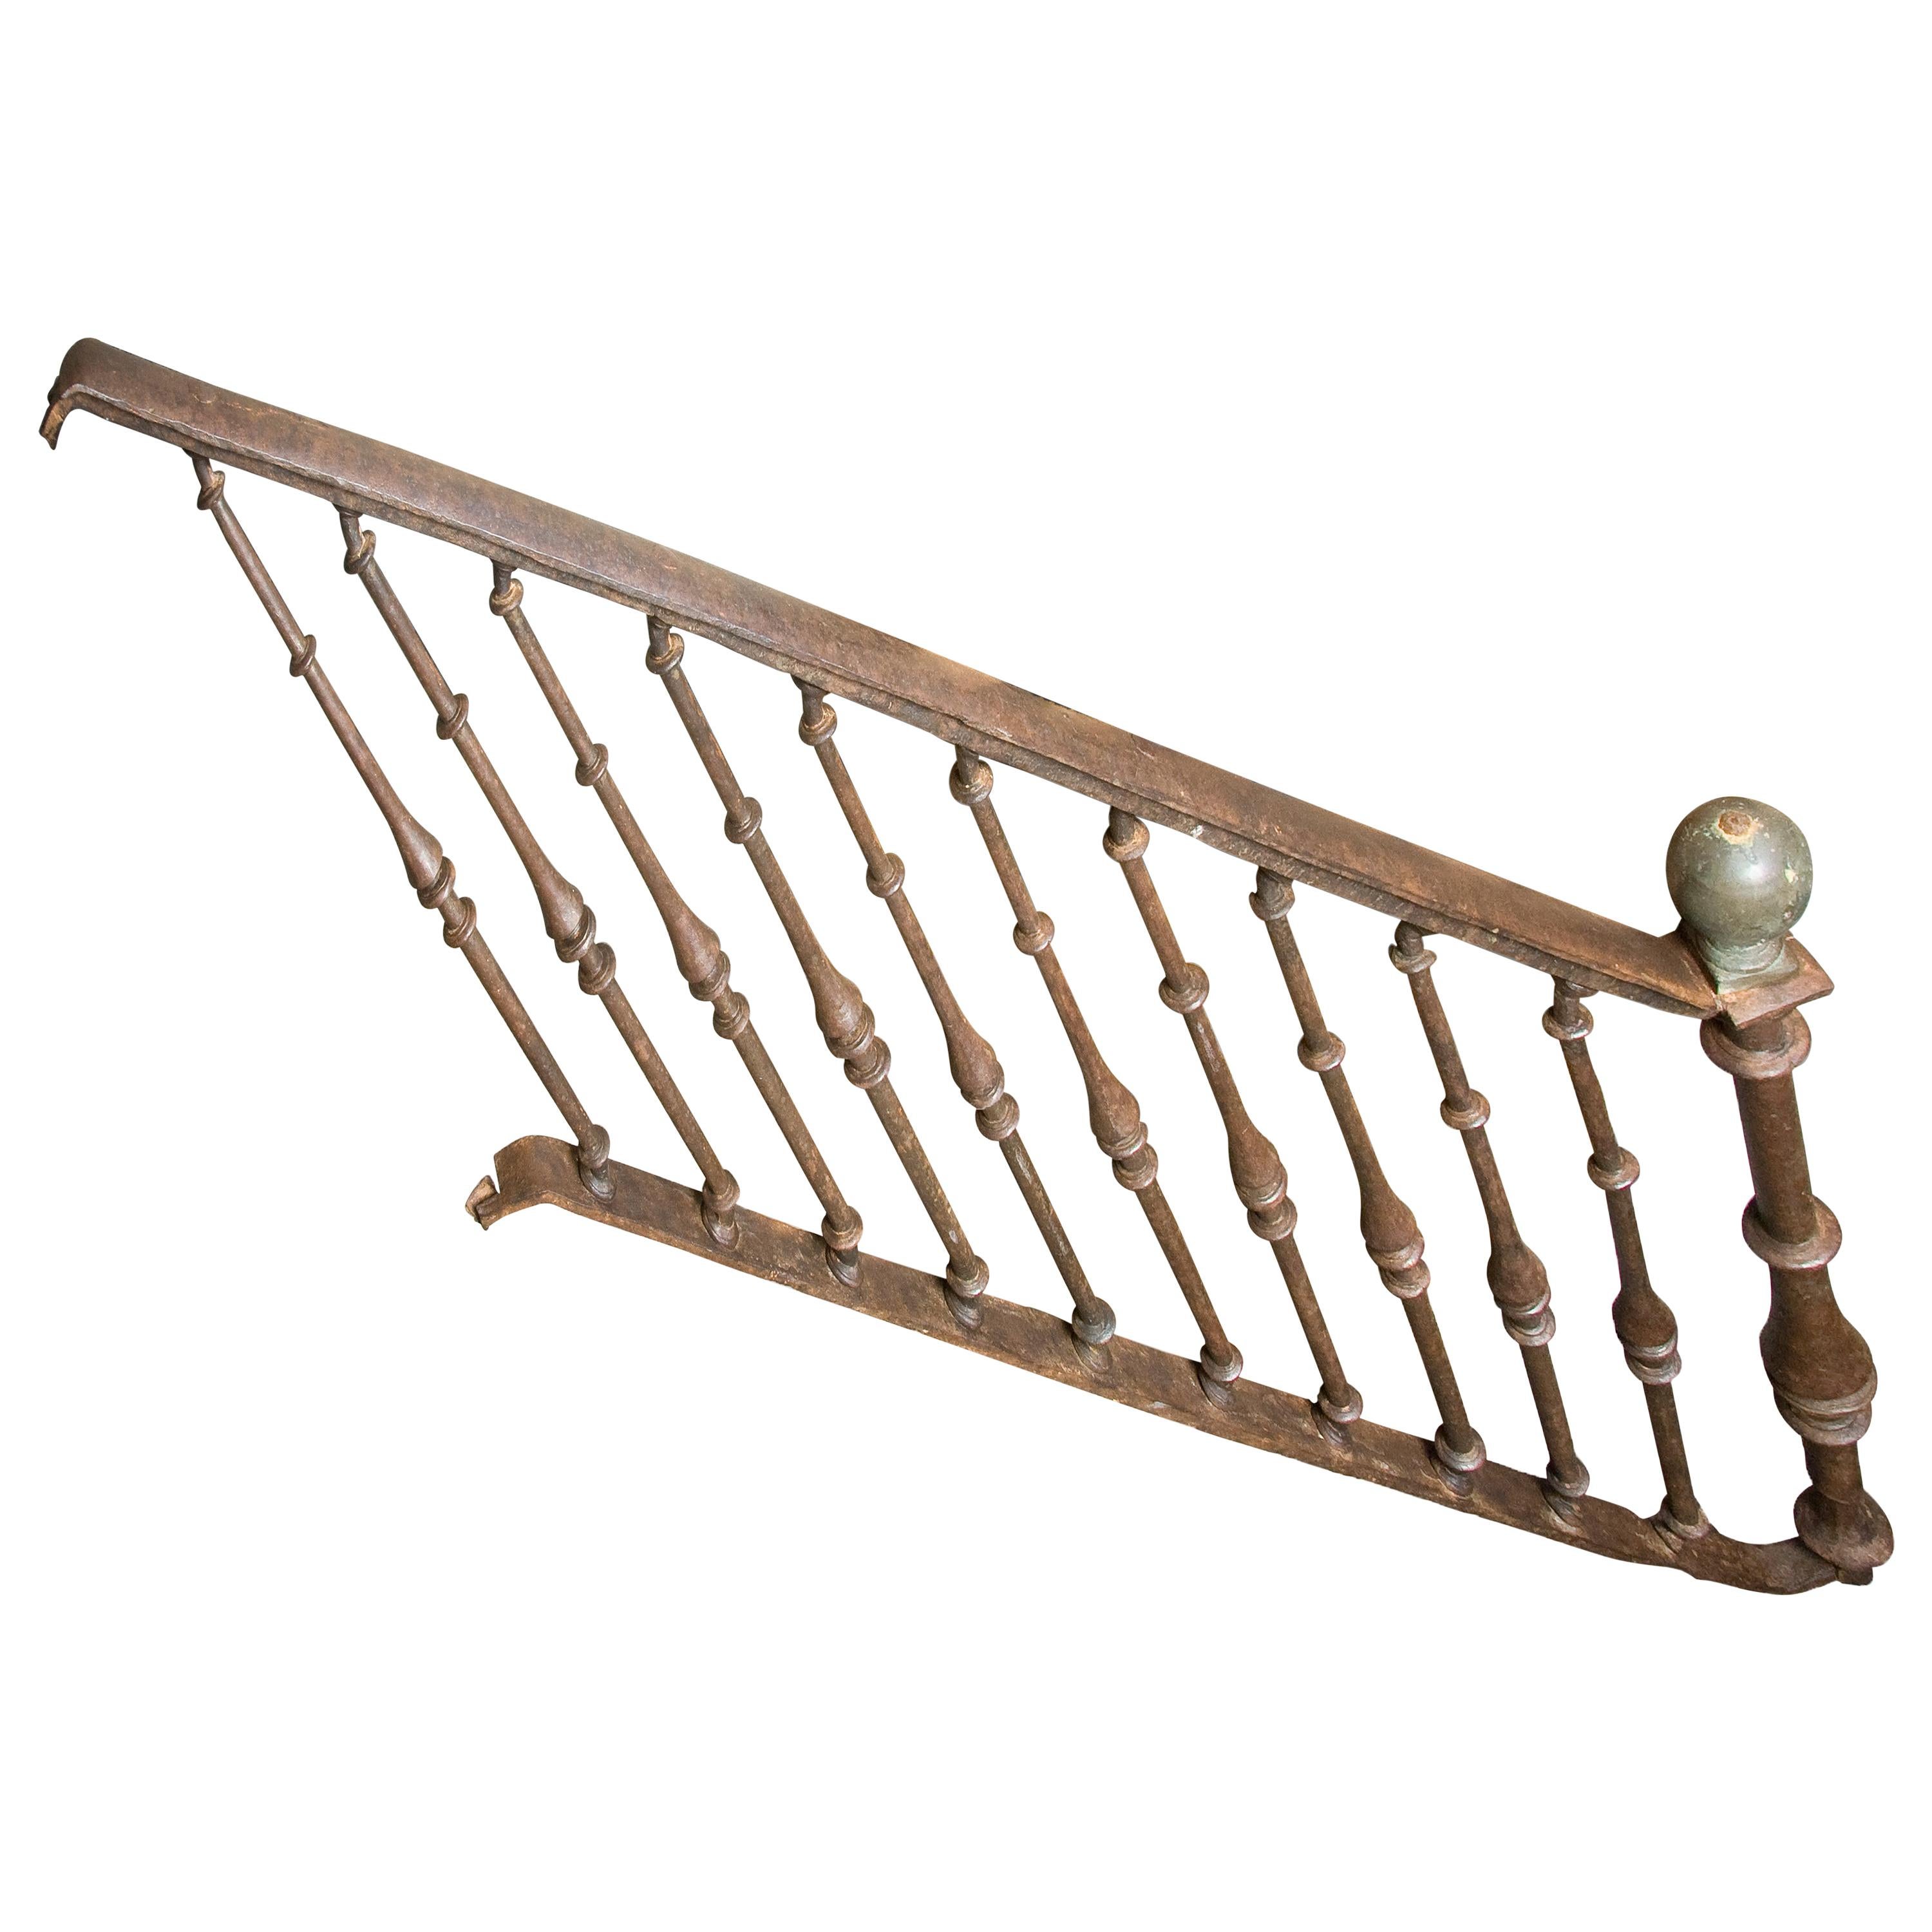 Railing with Banisters, Wrought Iron, 16th Century